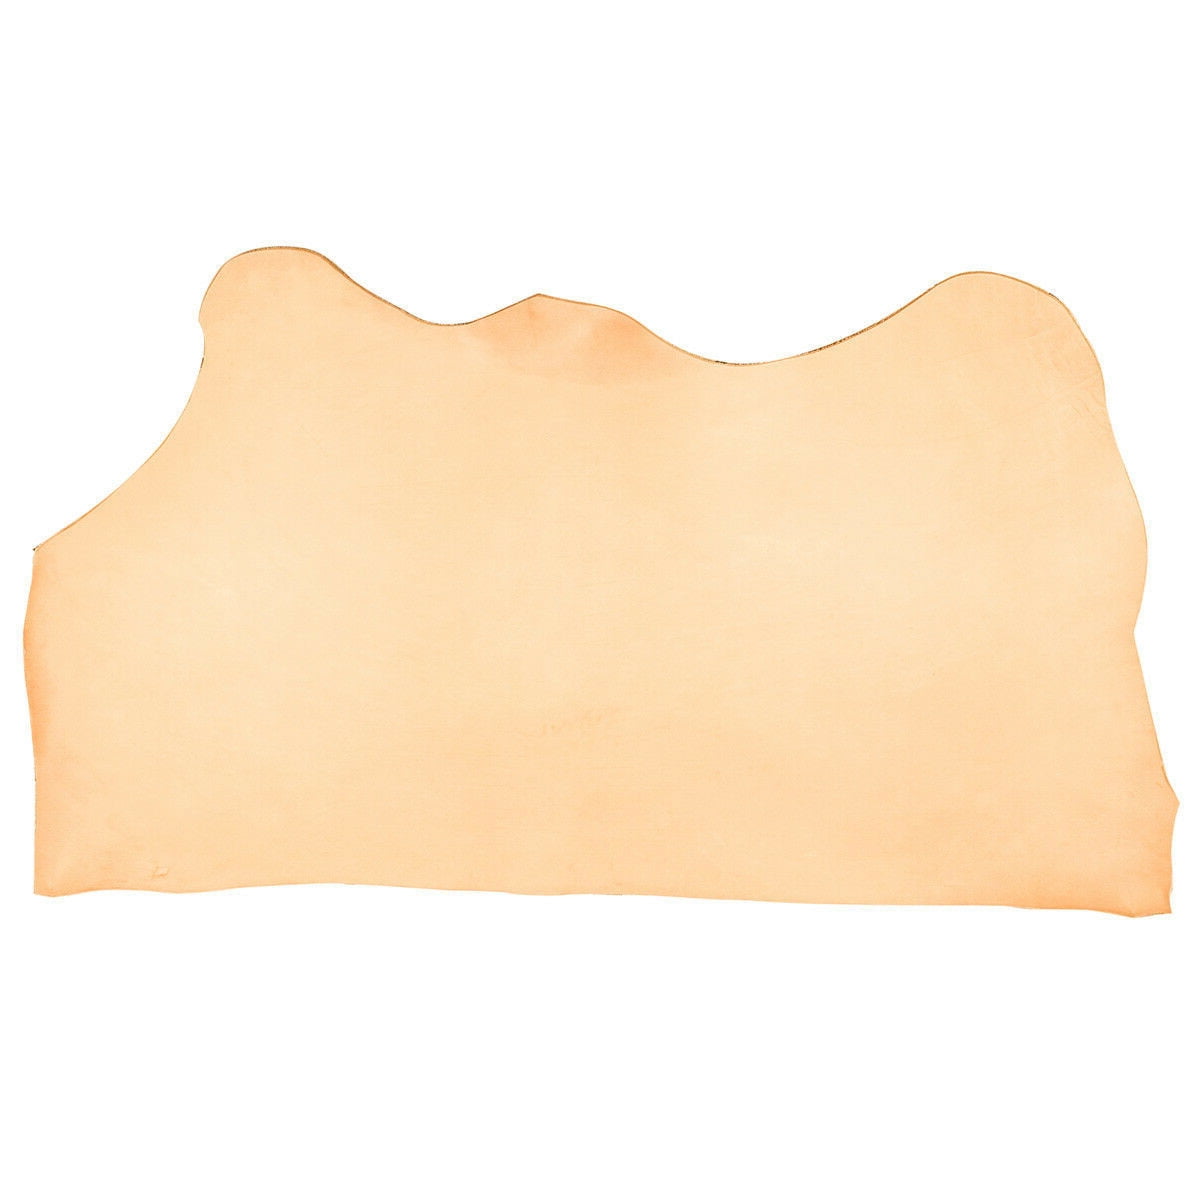 PROMOTION 4/5 oz NATURAL VEG TAN TOOLING LEATHER COWHIDE SIDE 20+sqf FIRM TEMP 